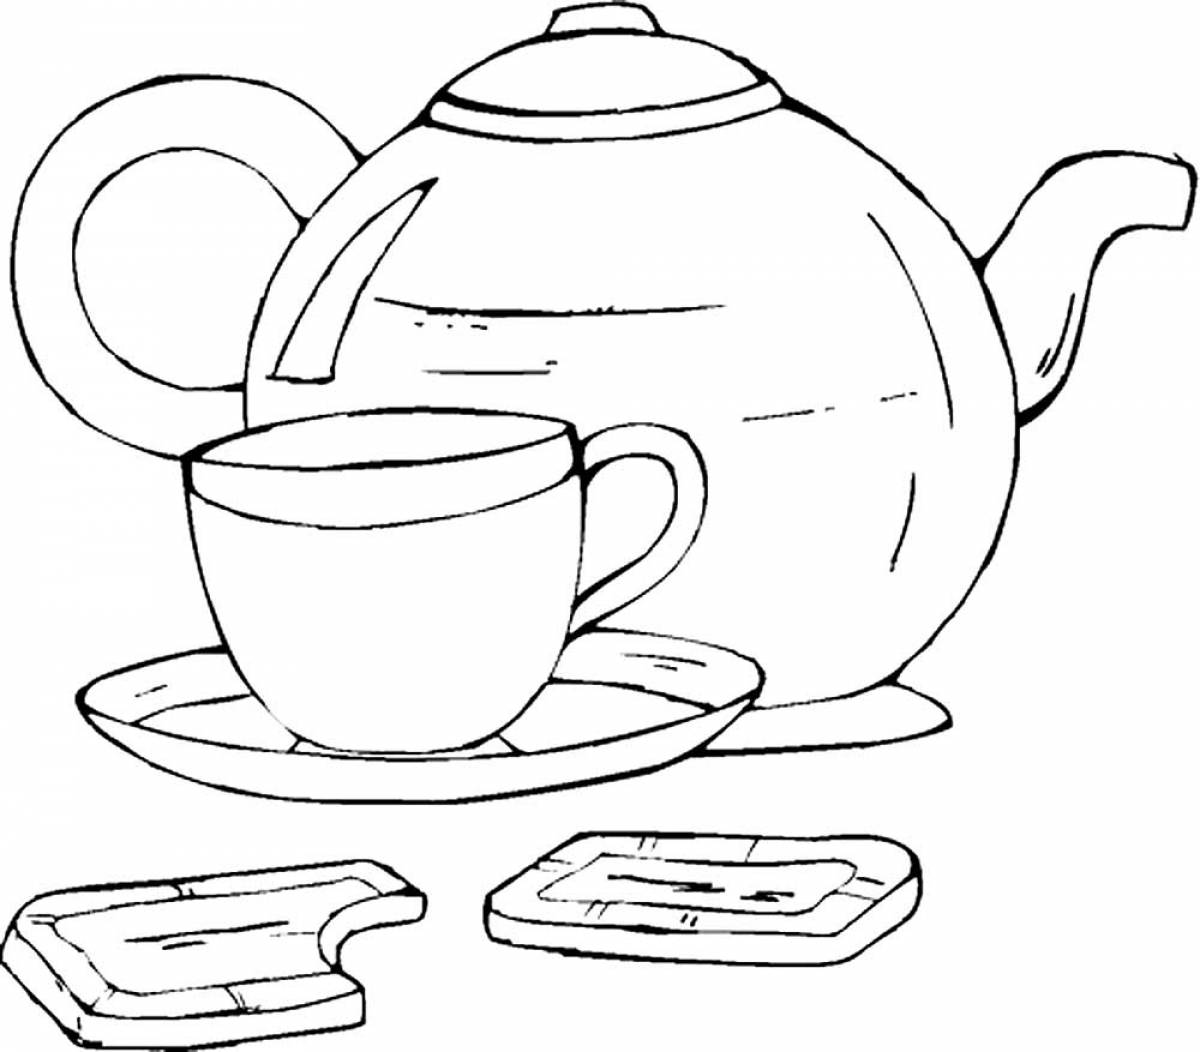 Incredible teapot and cup coloring book for kids